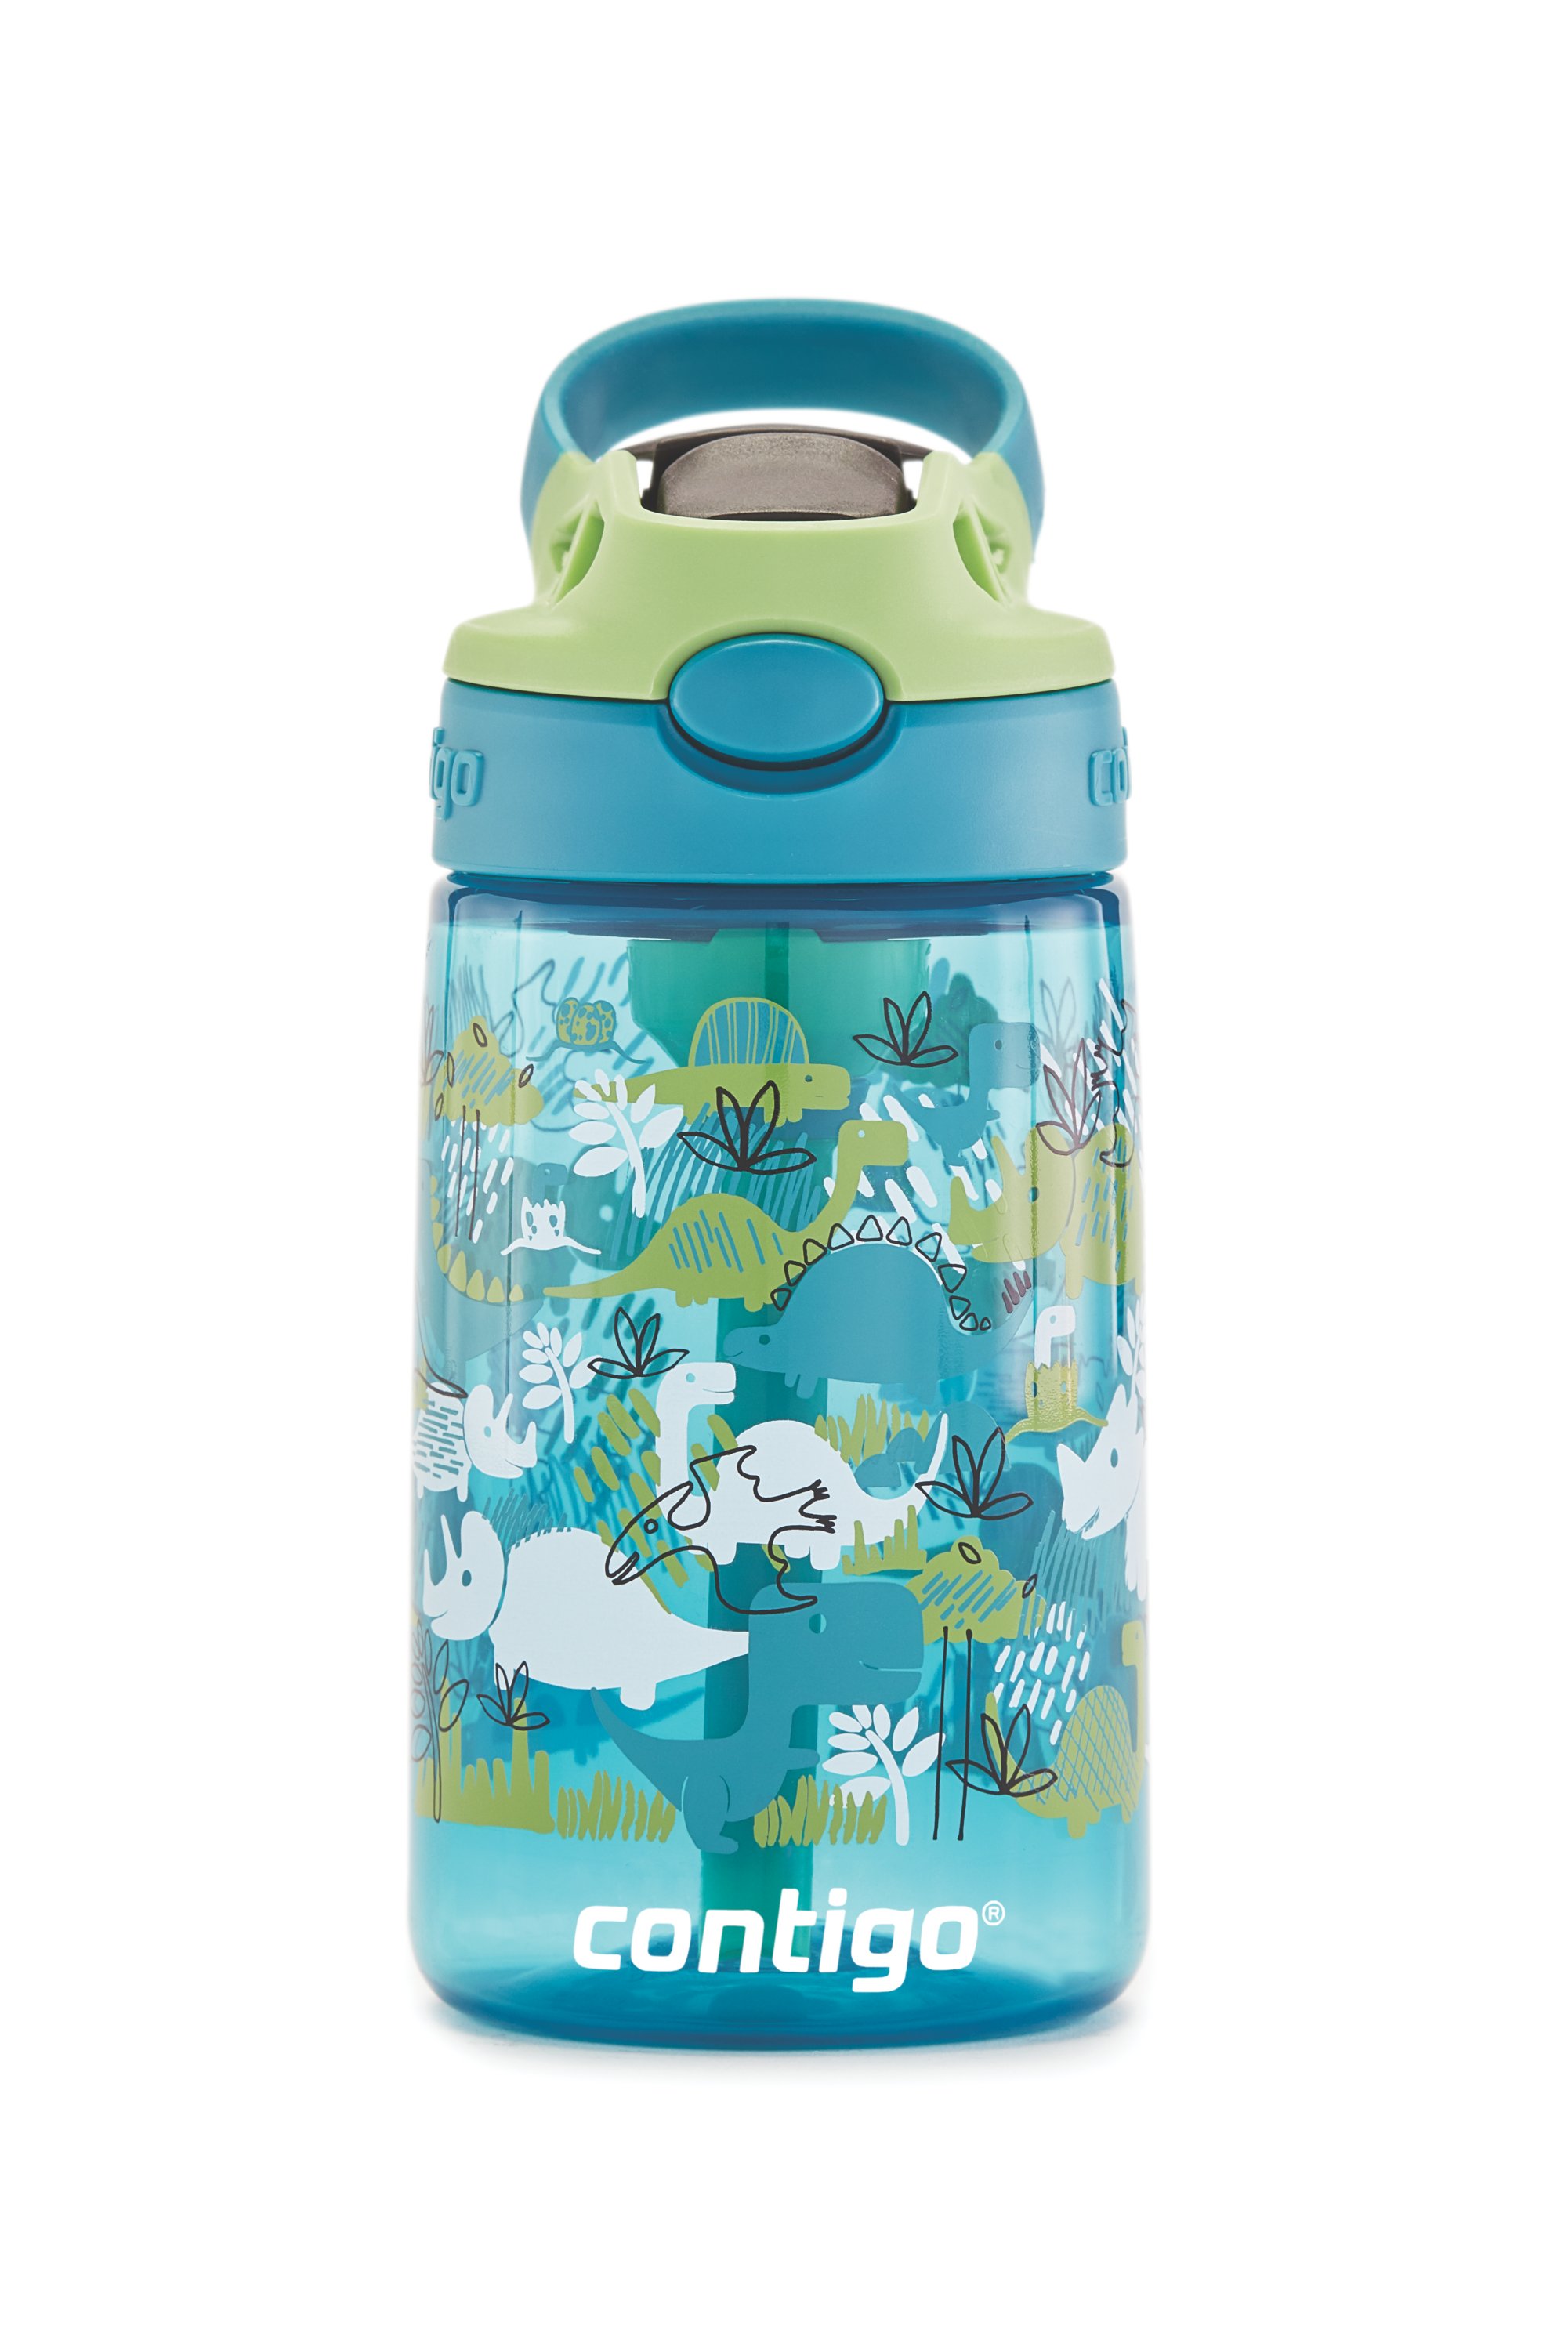 Contigo Gizmo Sip kids' drinking bottle; BPA-free, robust water bottle;  100% leak-proof; intuitive d…See more Contigo Gizmo Sip kids' drinking  bottle;